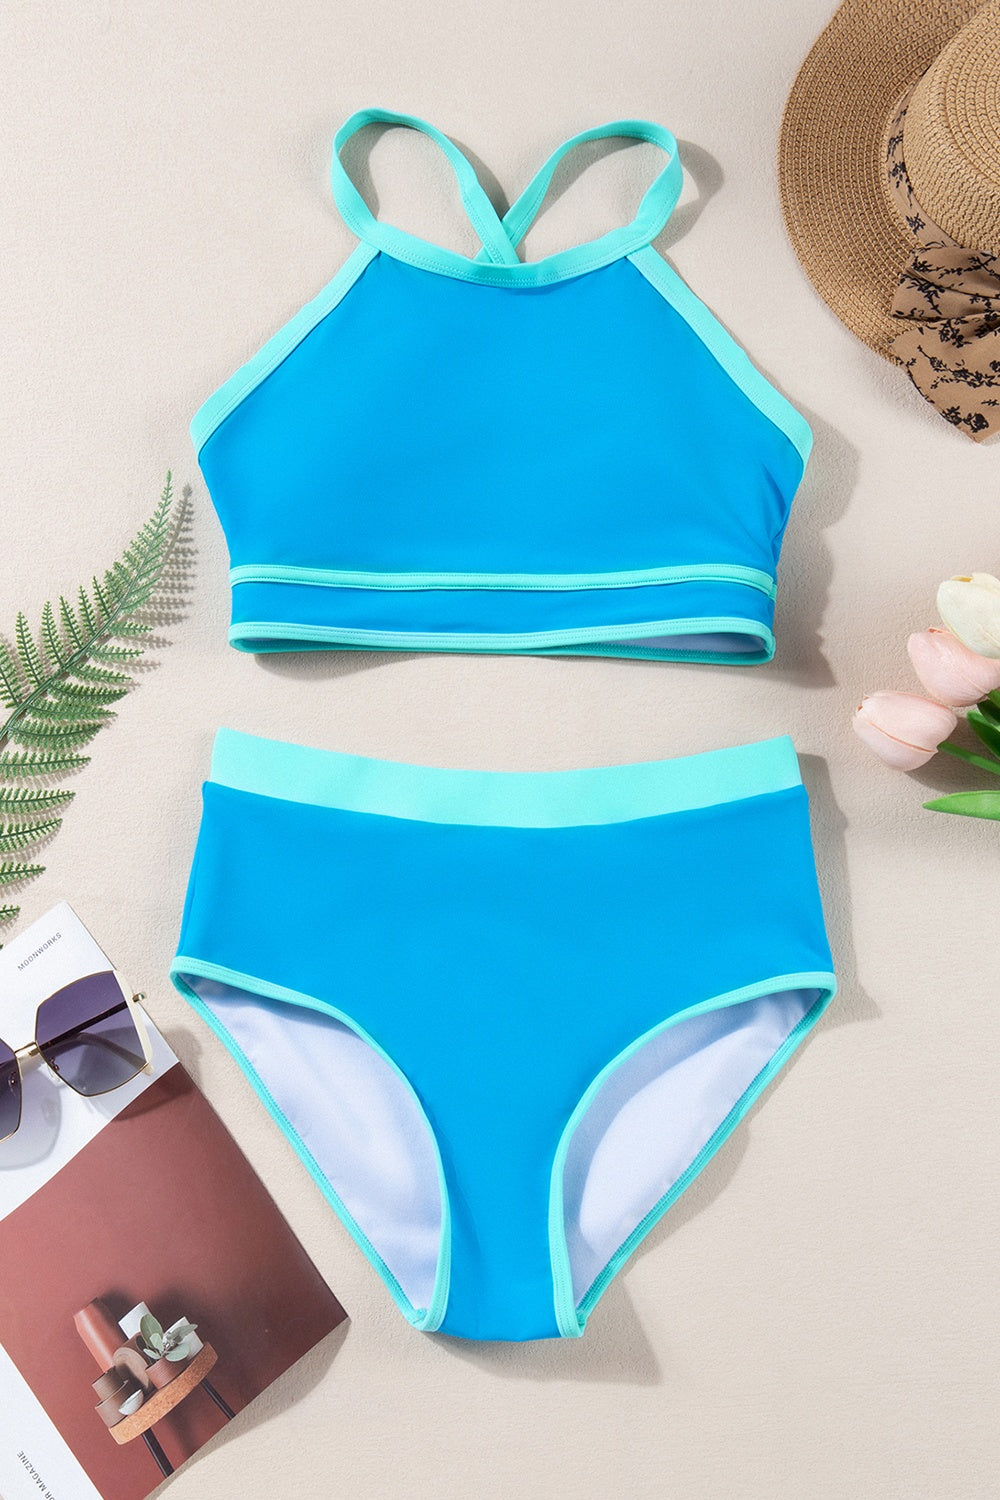 Stylish blue two-piece swimsuit with supportive fit and adjustable straps